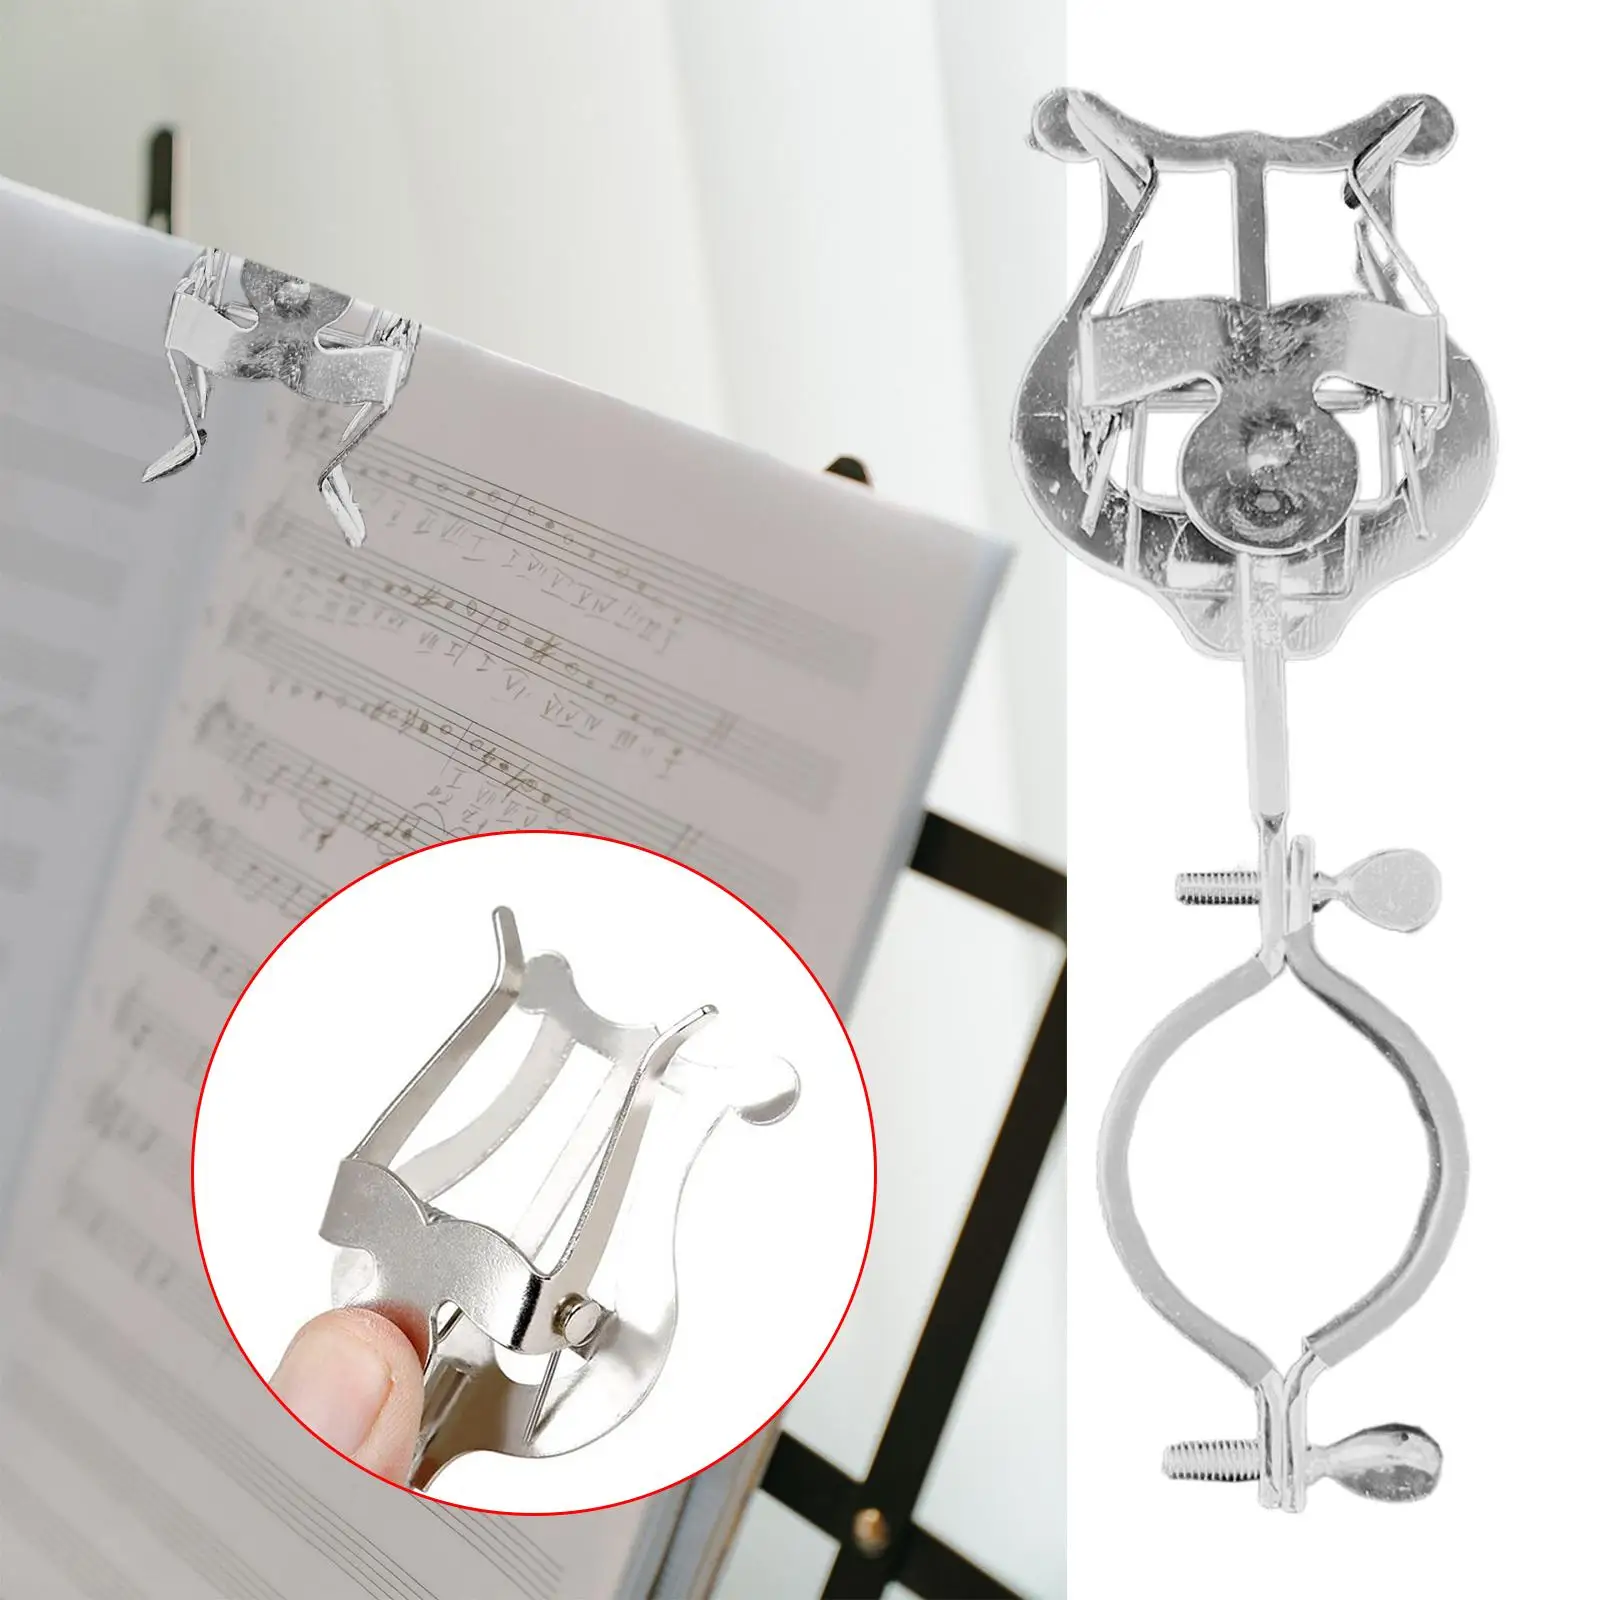 Sheet Music Wind Instrument Metal Sheet Music Clip Clamp Replacements